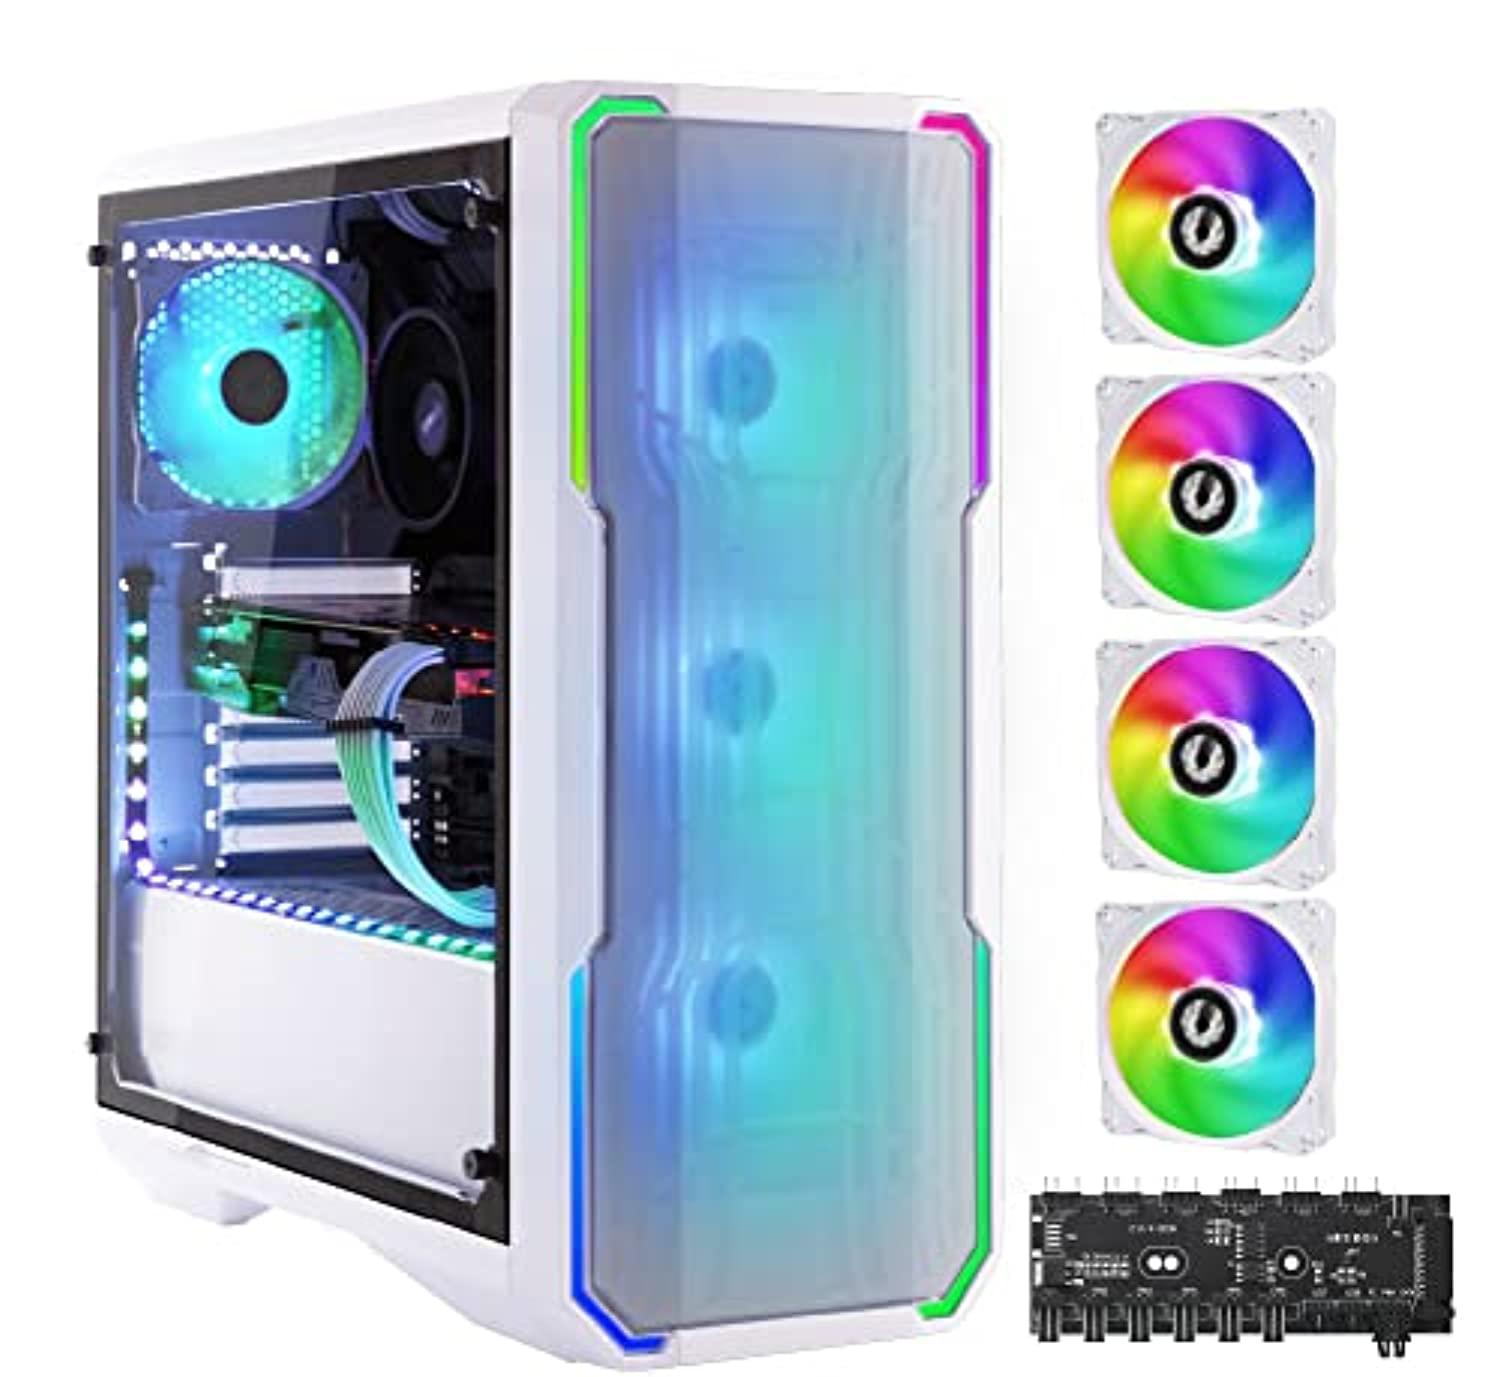 Madeliefje Missend vergeven BitFenix RNAB08XVTL16Q bitfenix enso mesh case white argb edition, mesh  front panel, tempered glass window side panel, atx/micro atx/mini itx form f